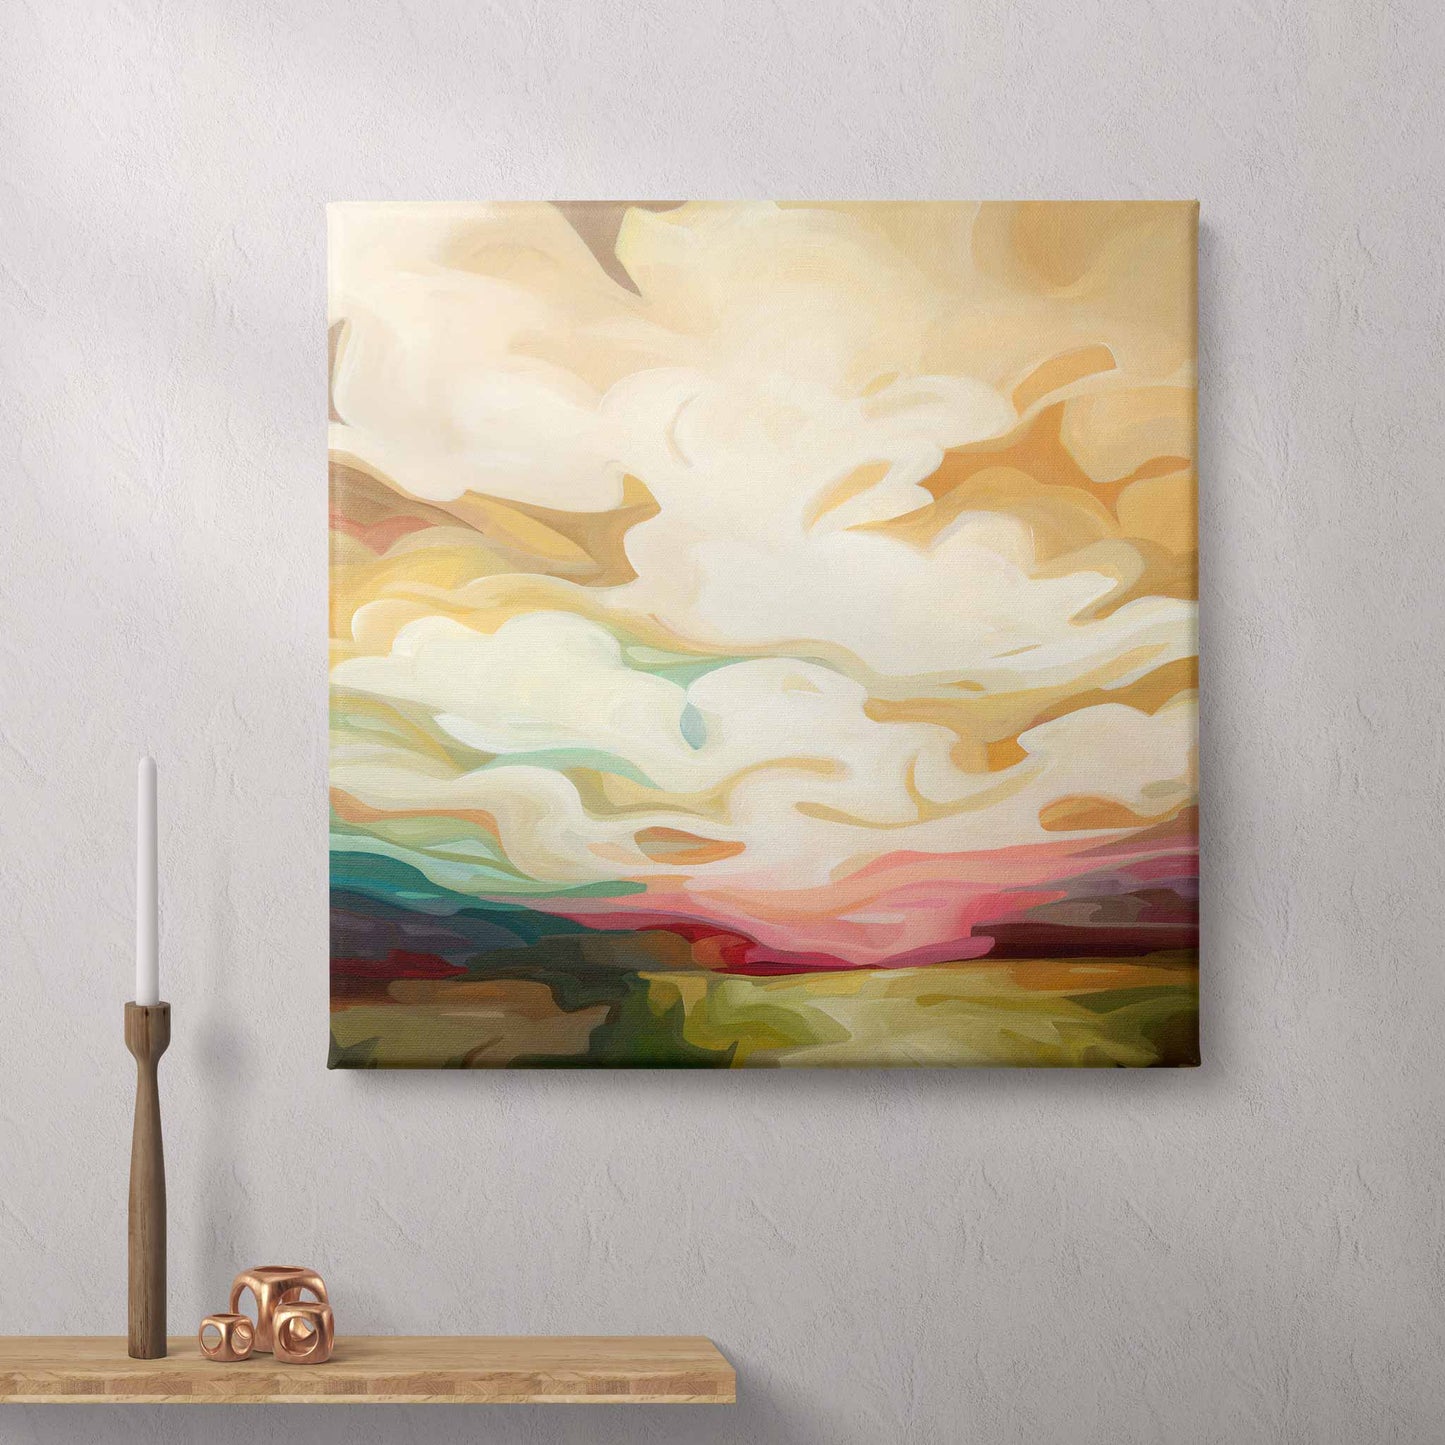 large square canvas art print of a golden sunrise painting by Canadian abstract artist Susannah Bleasby